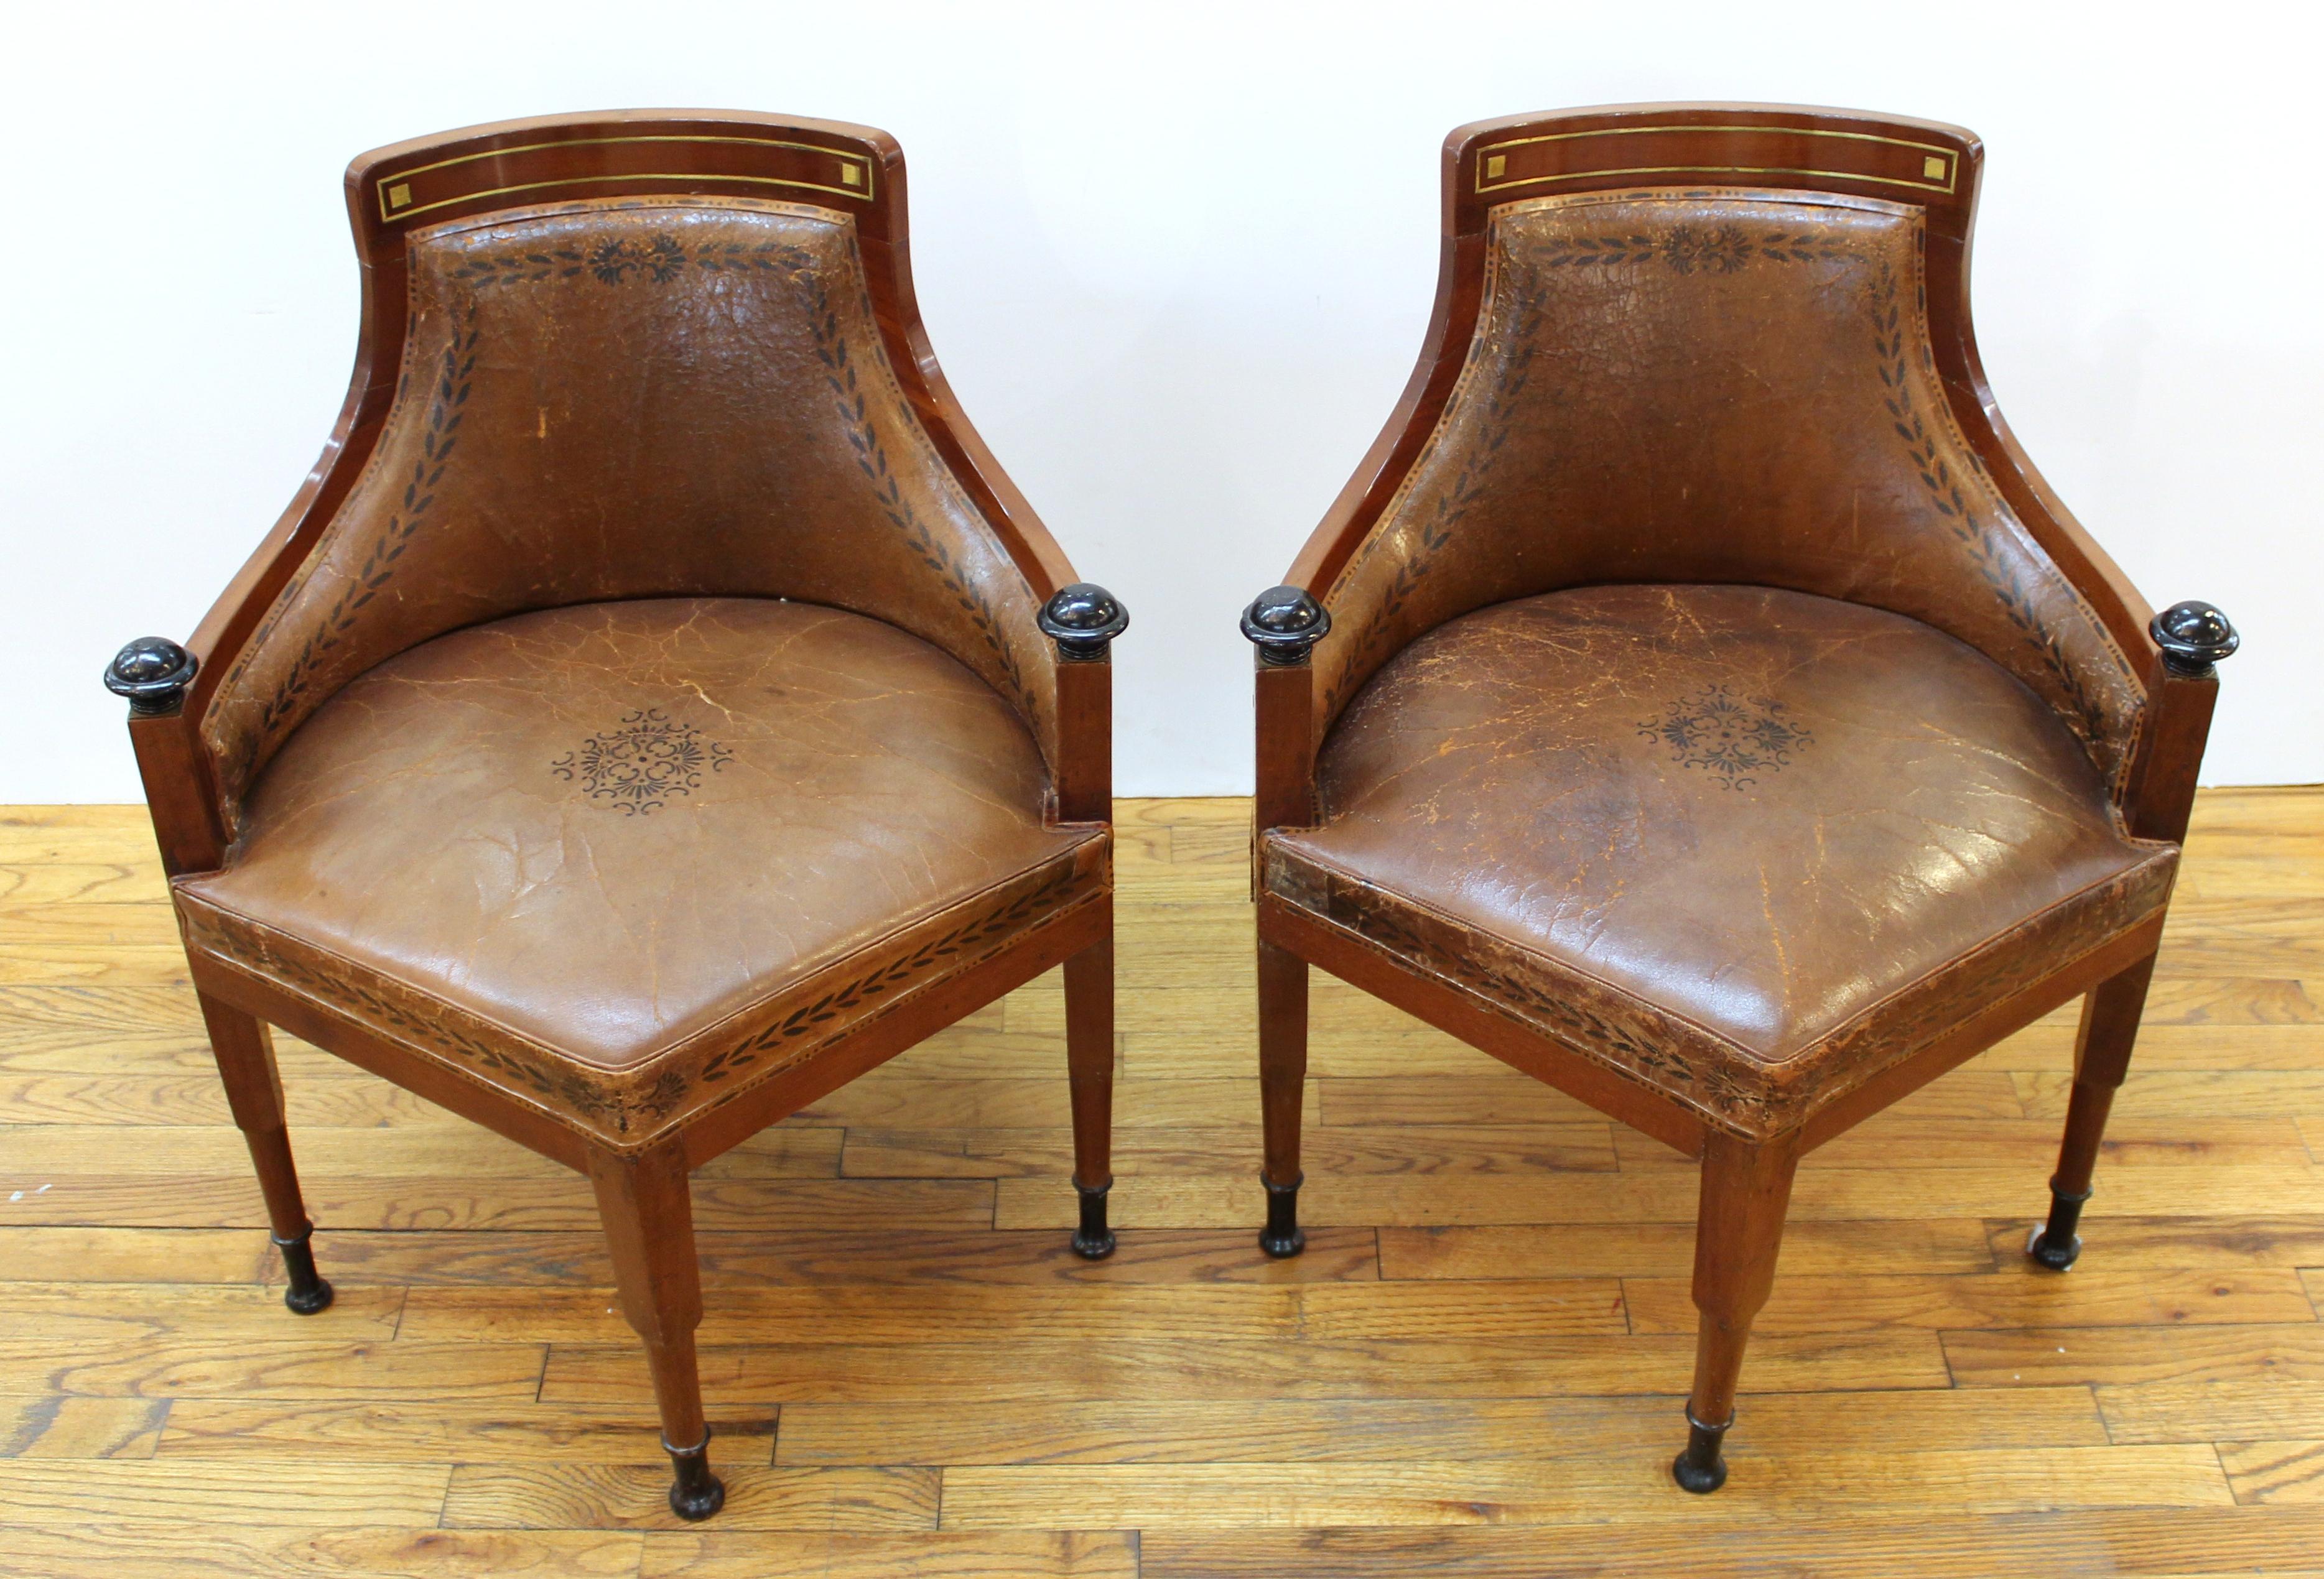 Pair of Russian or Baltic Empire desk chairs or corner chairs with curved backs in partly ebonized wood with metal inlay elements, the upholstered seat raised on square legs tapering to turned legs at the front, with ebonized sabots. Upholstered in